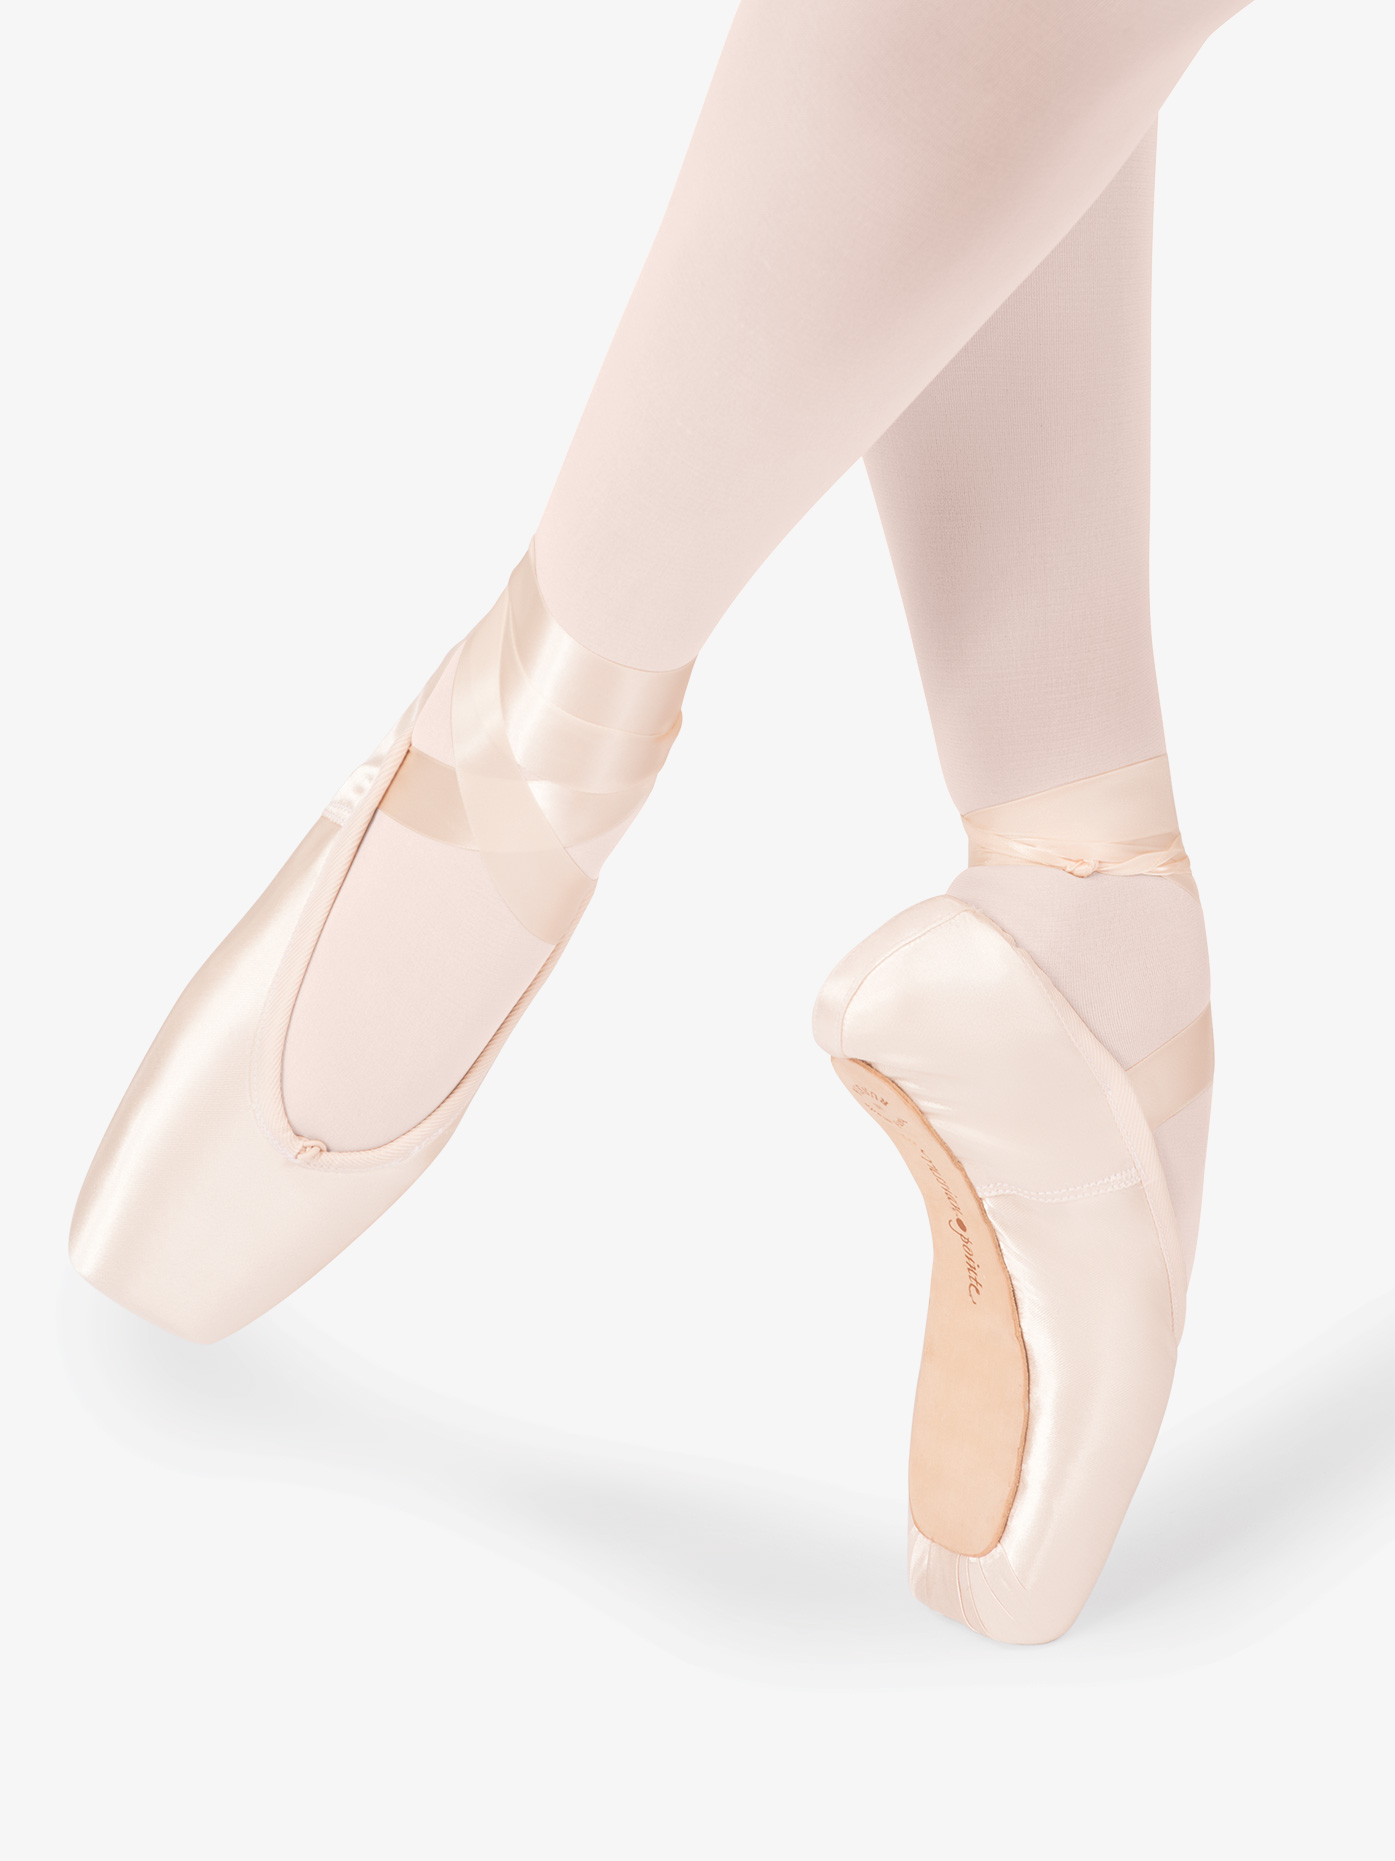 Russian Pointe Size Chart